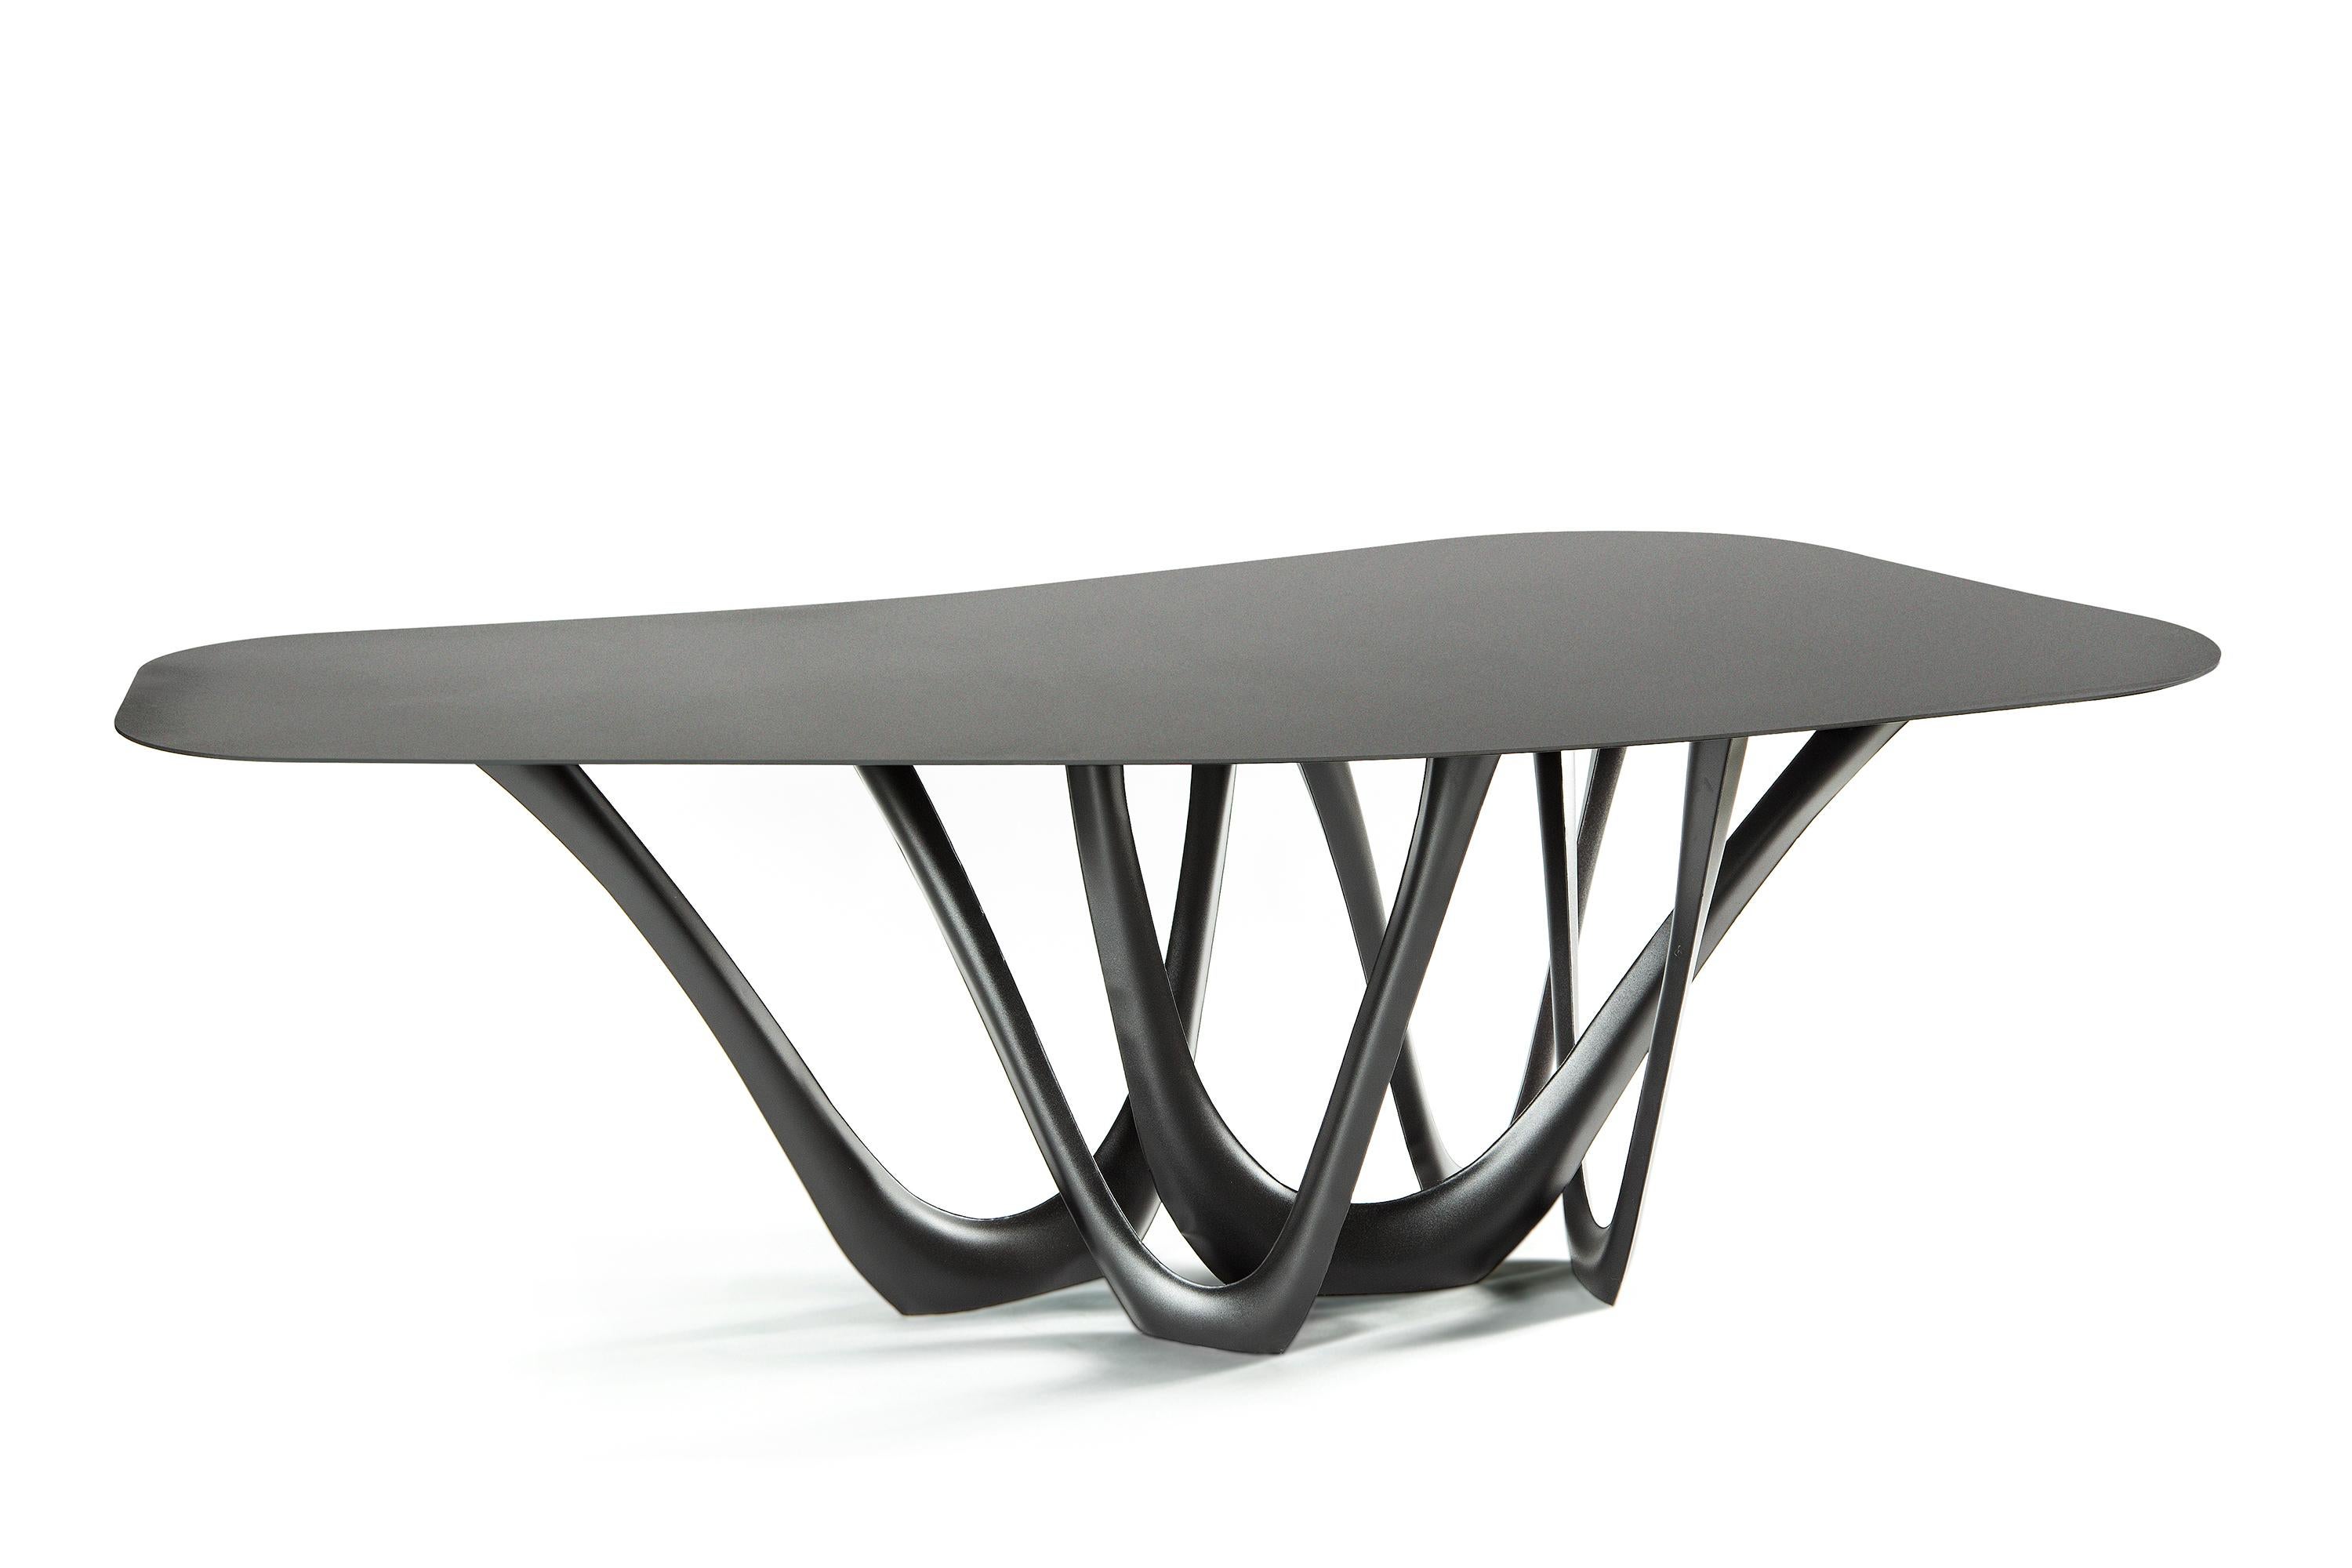 Powder-Coated Stone Grey Steel Sculptural G-Table by Zieta For Sale